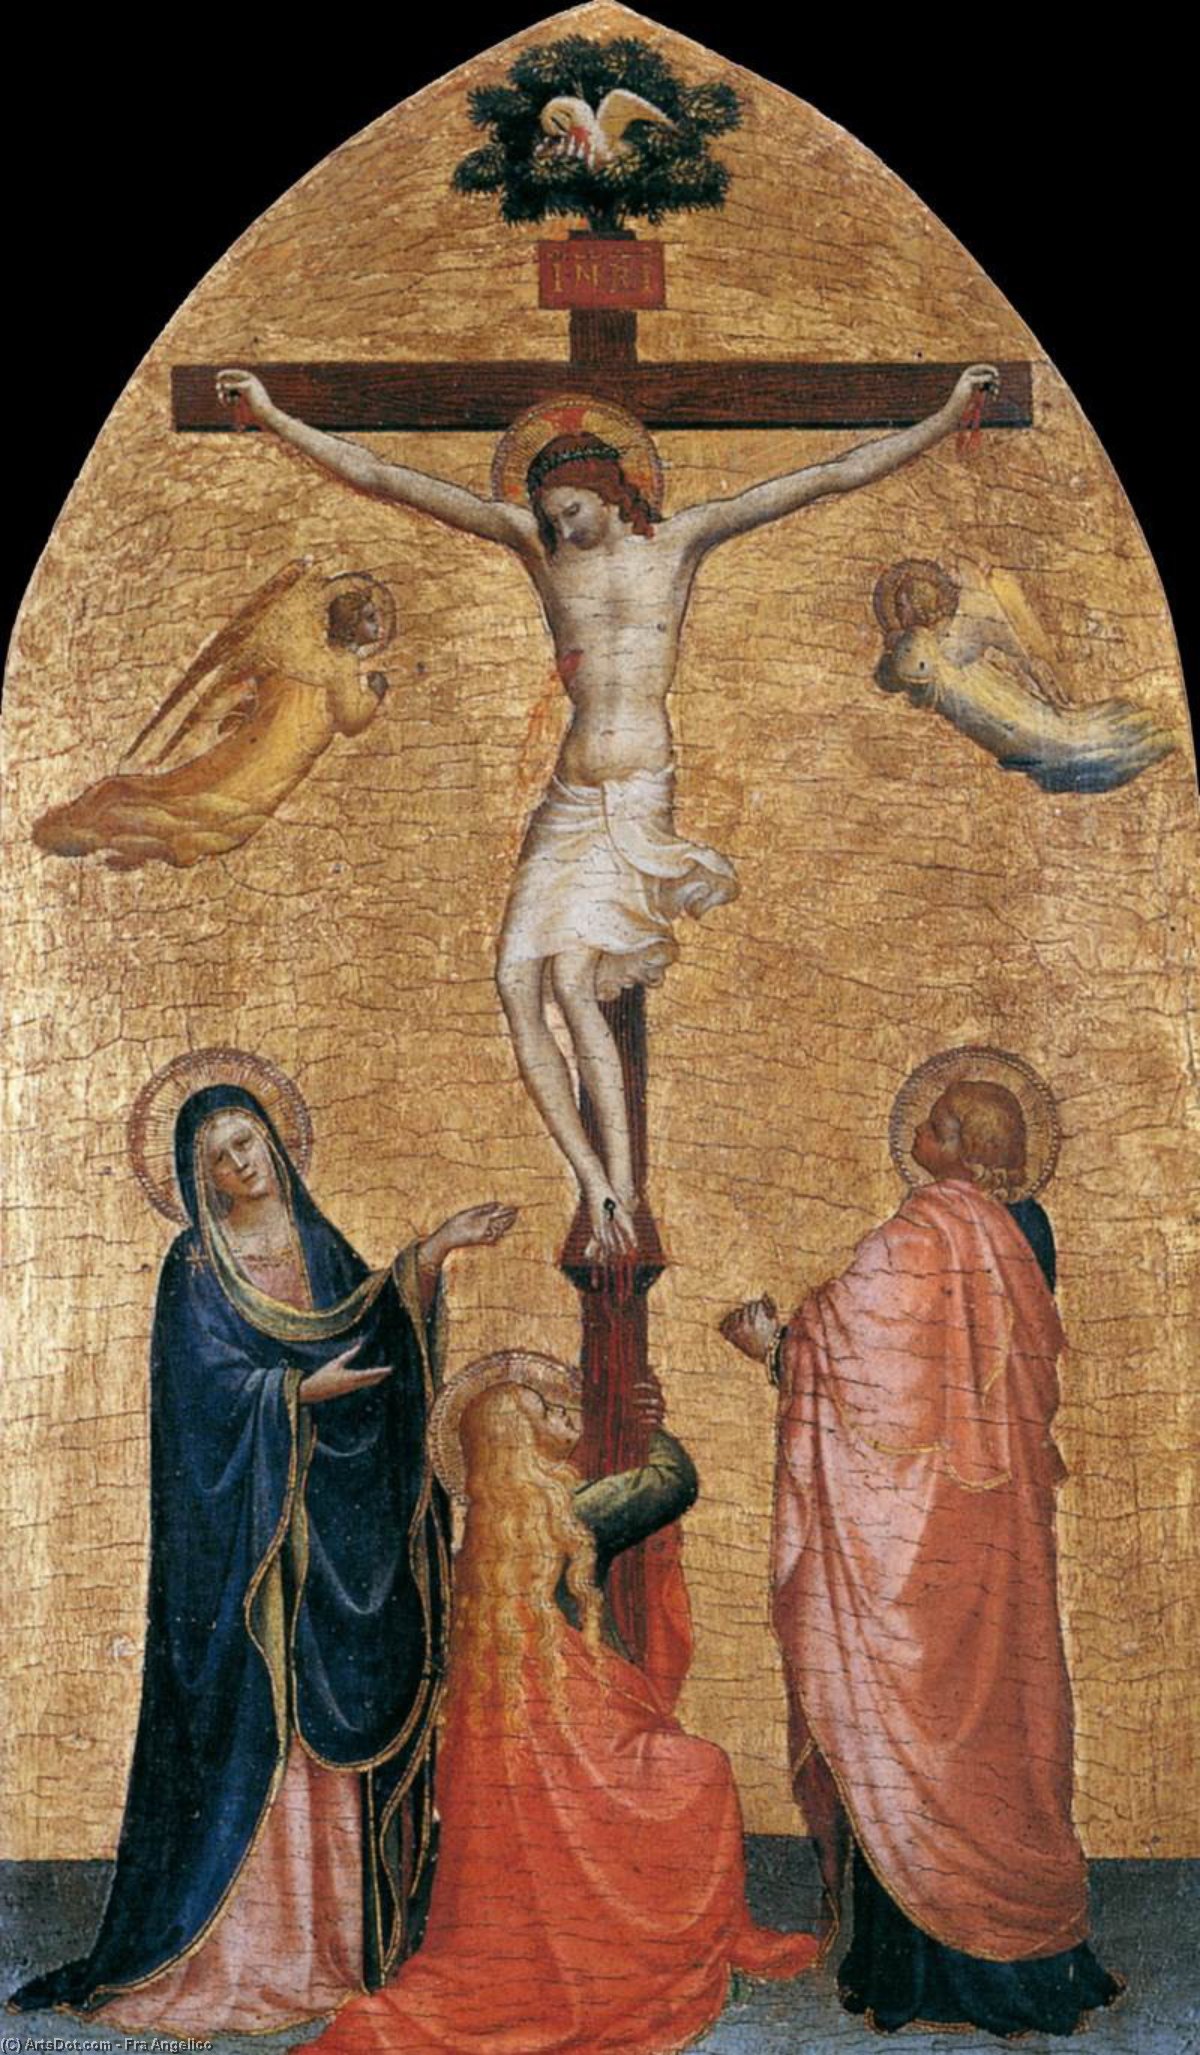 WikiOO.org - 백과 사전 - 회화, 삽화 Fra Angelico - Crucifixion with the Virgin, John the Evangelist, and Mary Magdelene